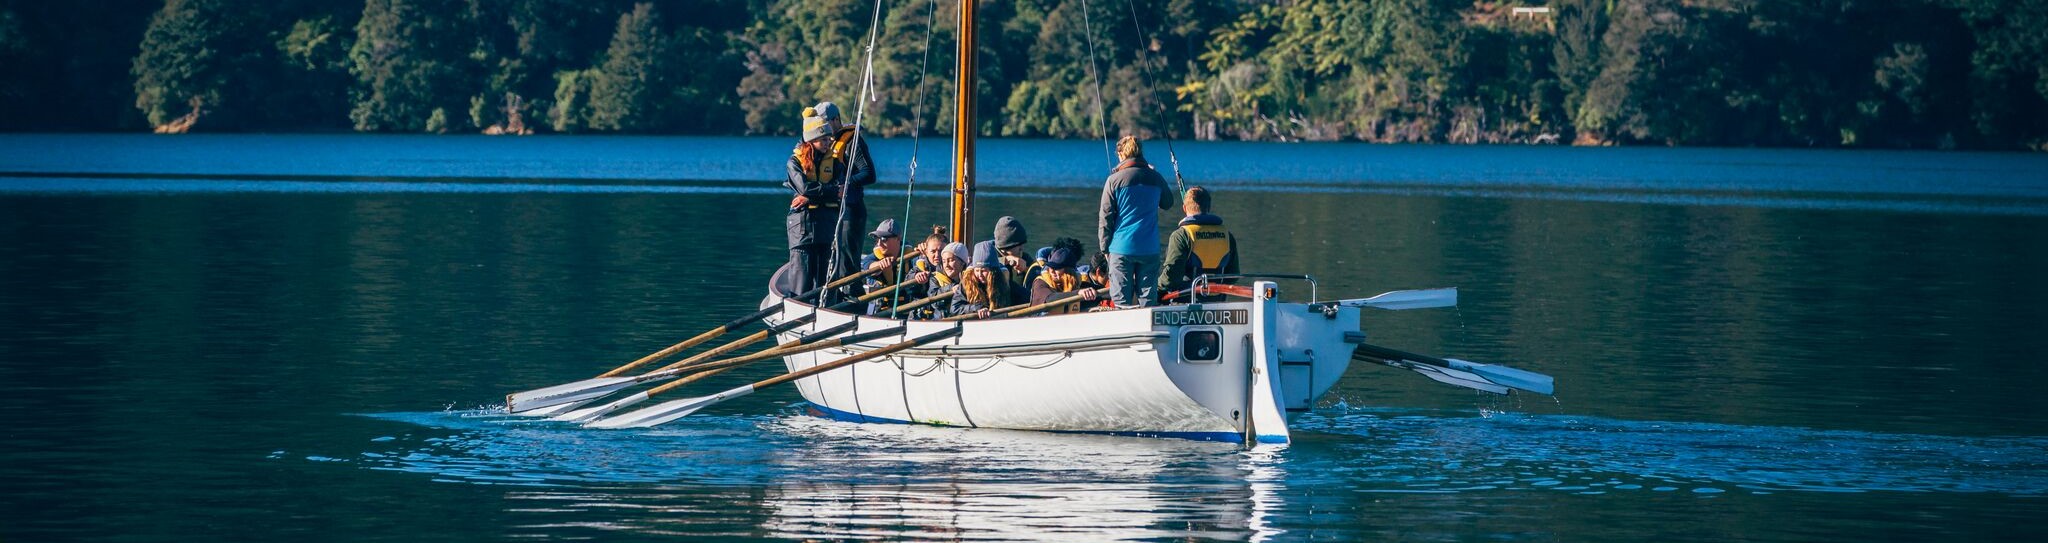 Featured image for “Outward Bound New Zealand”